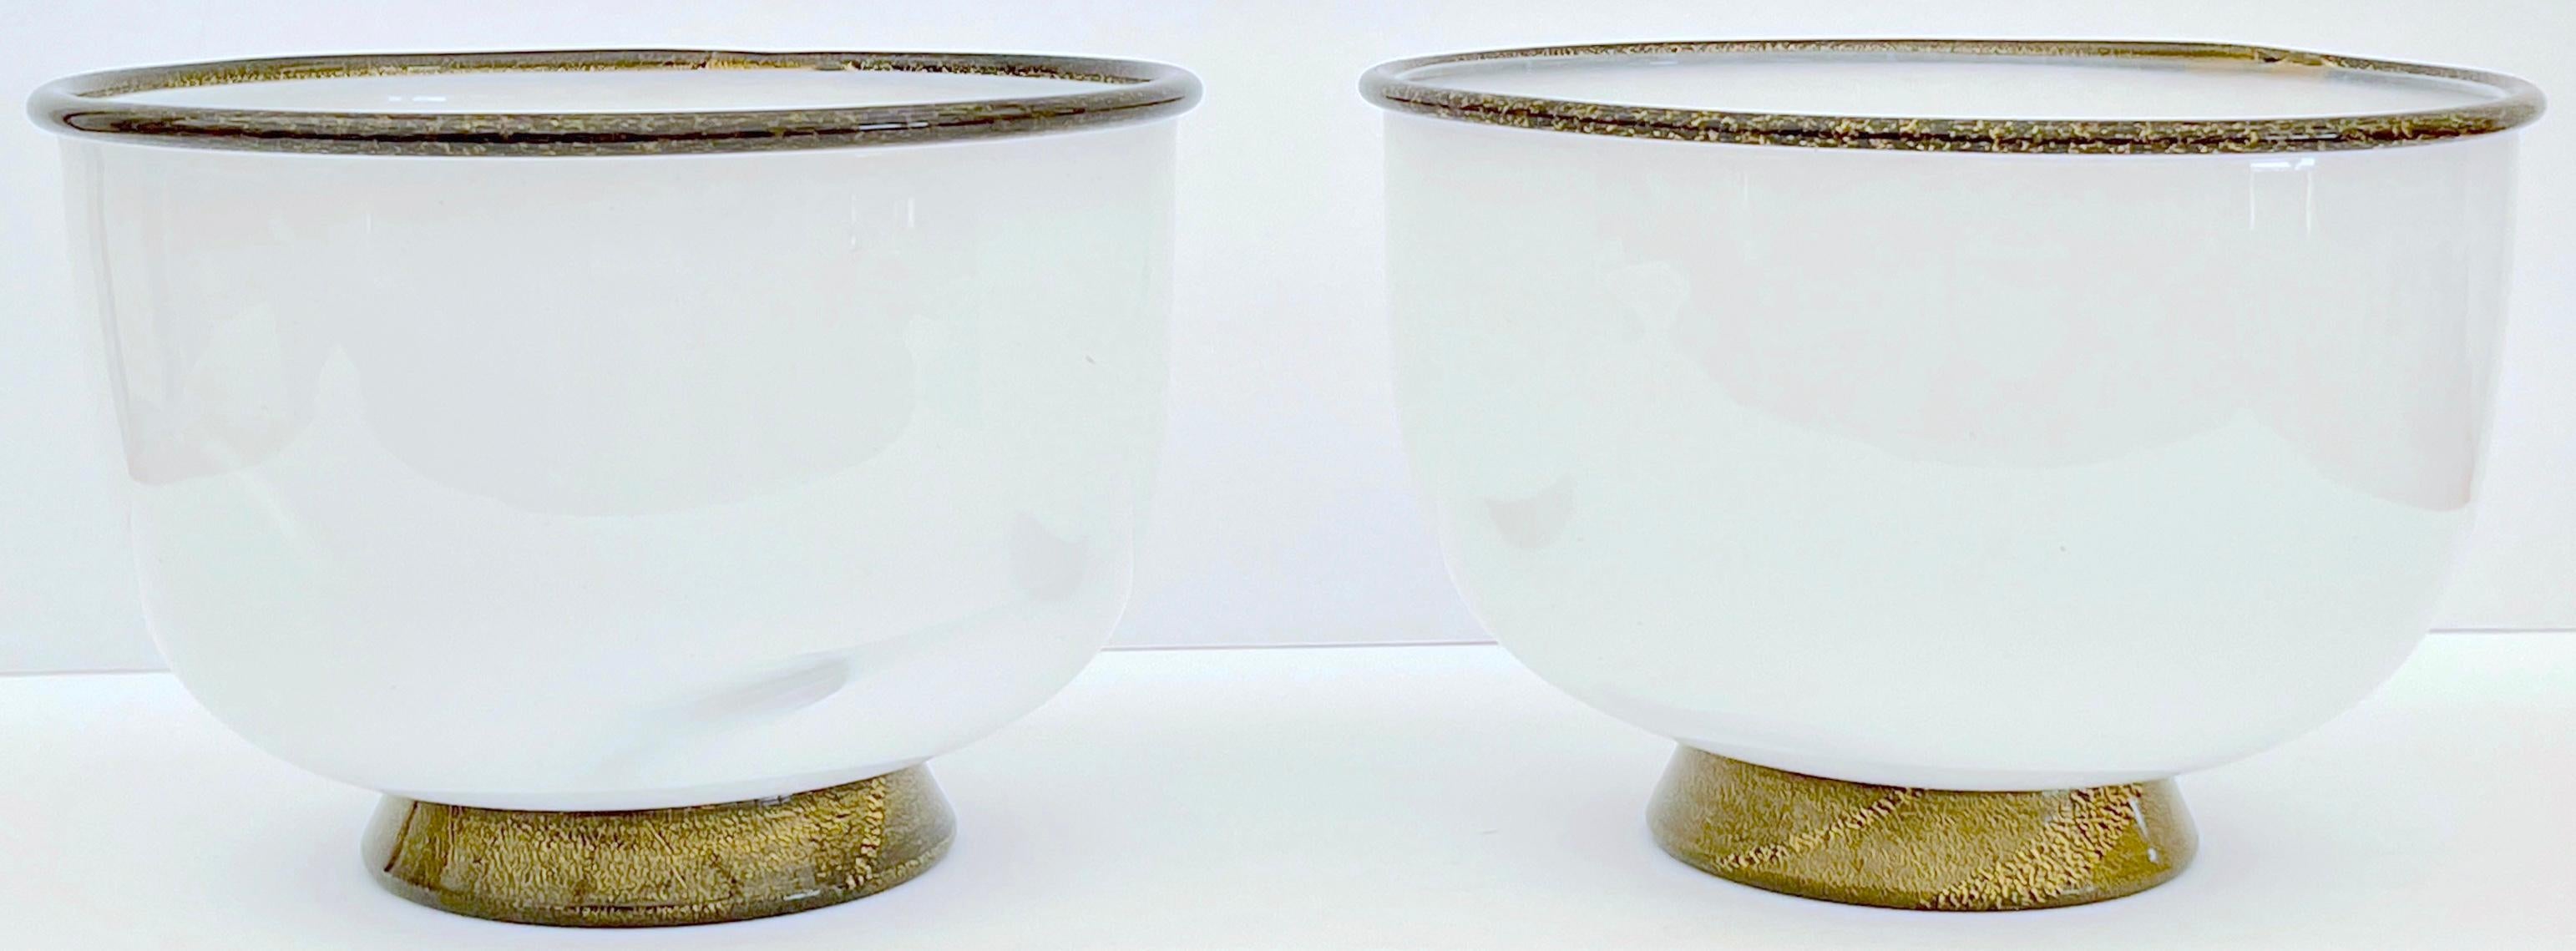 Pair Signed Barovier & Toso Murano 'Primavera' Bowls*

Primavera Murano glass designed by Ercole Barovier and produced by Barovier & Toso, 1980s
Each one signed  Barovier & Toso Murano

A splendid pair of 'Primavera' Bowls, expertly crafted and